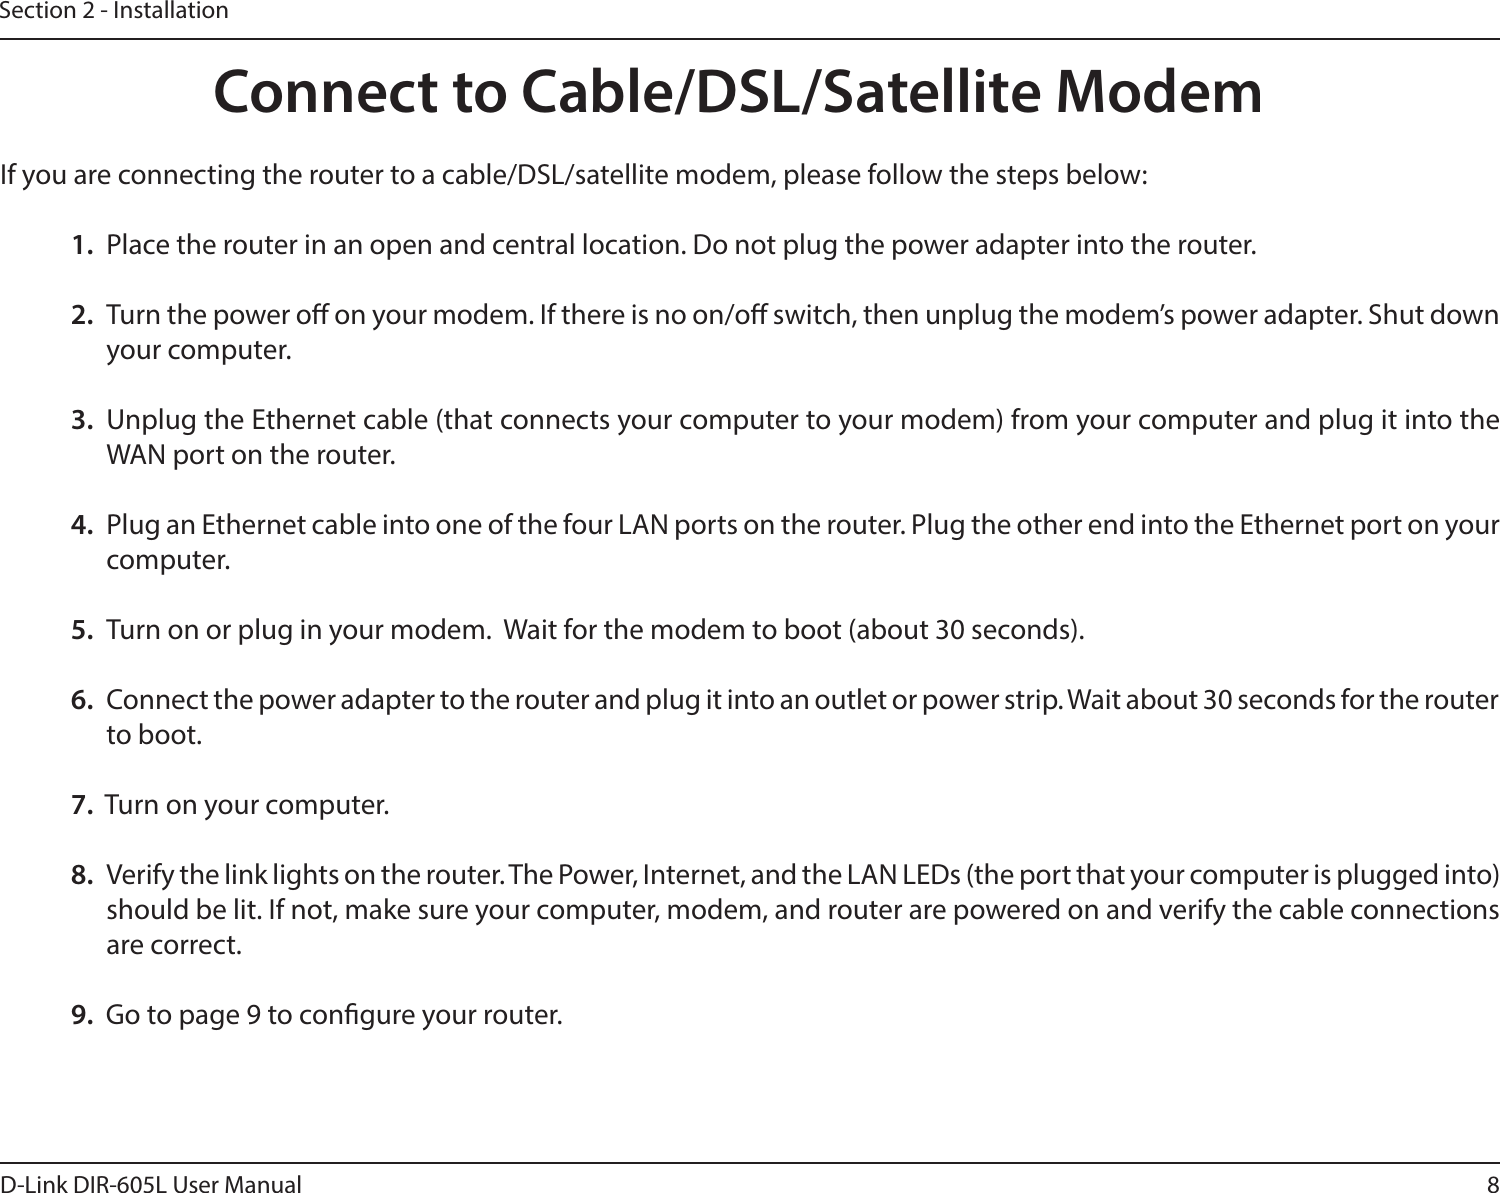 8D-Link DIR-605L User ManualSection 2 - InstallationIf you are connecting the router to a cable/DSL/satellite modem, please follow the steps below:1.  Place the router in an open and central location. Do not plug the power adapter into the router. 2.  Turn the power o on your modem. If there is no on/o switch, then unplug the modem’s power adapter. Shut down your computer.3.  Unplug the Ethernet cable (that connects your computer to your modem) from your computer and plug it into the WAN port on the router.  4.  Plug an Ethernet cable into one of the four LAN ports on the router. Plug the other end into the Ethernet port on your computer.5.  Turn on or plug in your modem.  Wait for the modem to boot (about 30 seconds). 6.  Connect the power adapter to the router and plug it into an outlet or power strip. Wait about 30 seconds for the router to boot. 7.  Turn on your computer. 8.  Verify the link lights on the router. The Power, Internet, and the LAN LEDs (the port that your computer is plugged into) should be lit. If not, make sure your computer, modem, and router are powered on and verify the cable connections are correct. 9.  Go to page 9 to congure your router. Connect to Cable/DSL/Satellite Modem